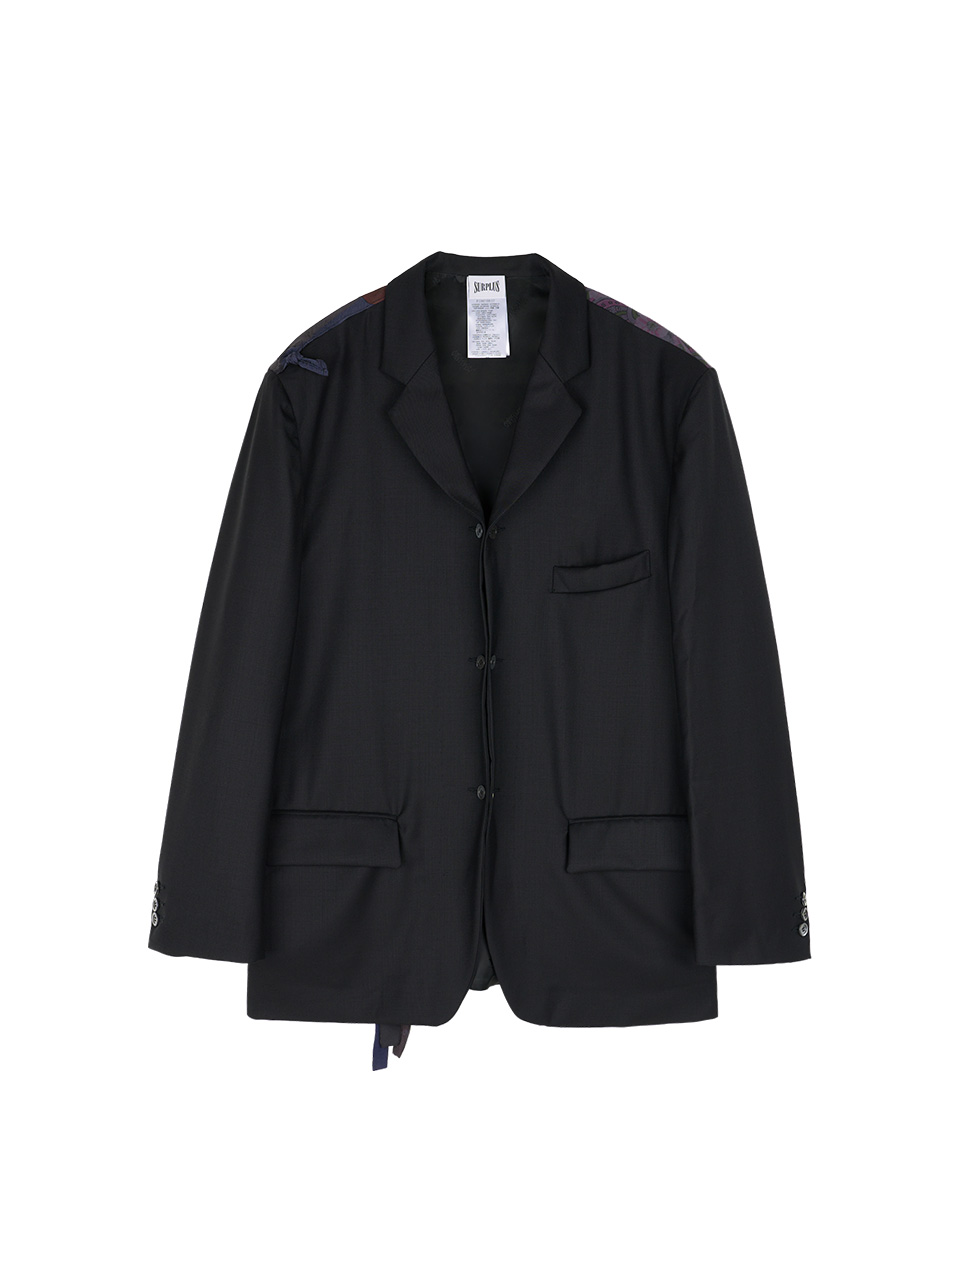 MAGLIANO - A DRUNK THREE BUTTONS JACKET (BLACK)